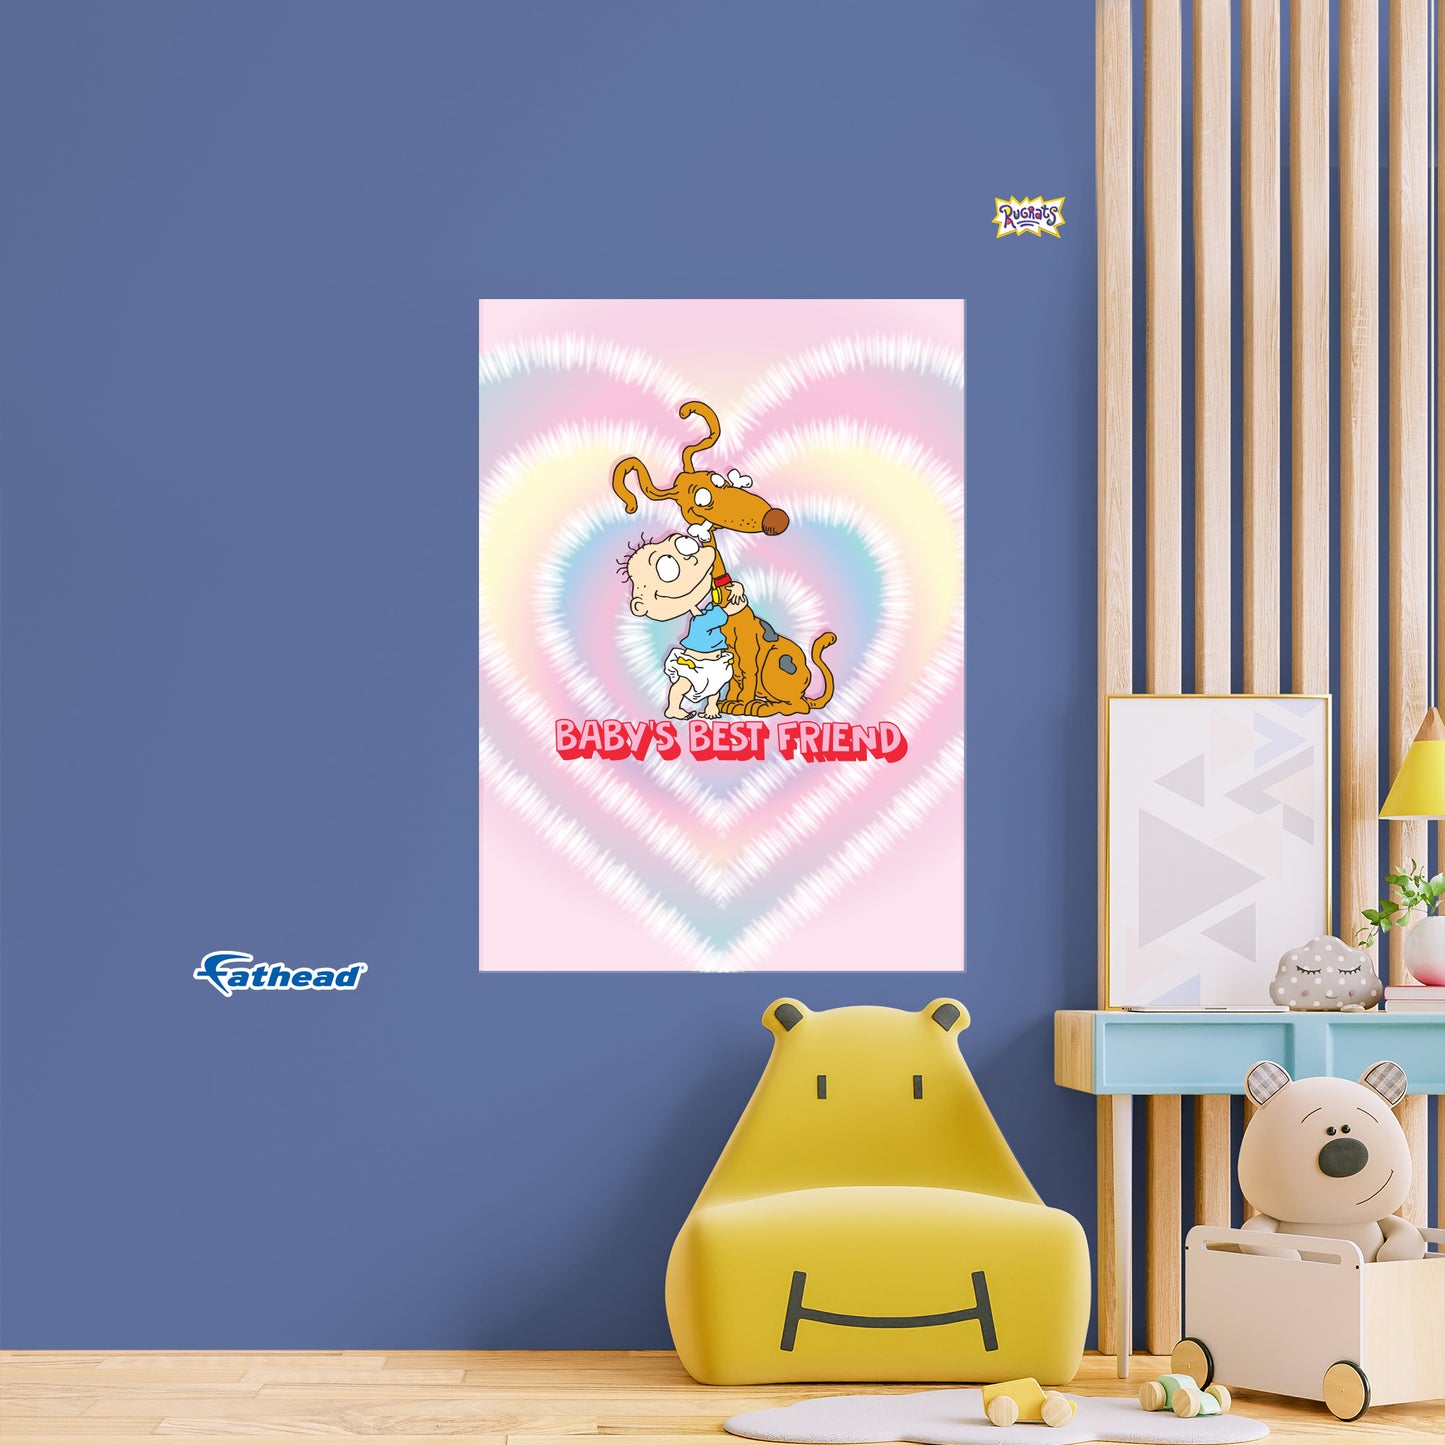 Rugrats: Baby's Best Friend Poster - Officially Licensed Nickelodeon Removable Adhesive Decal